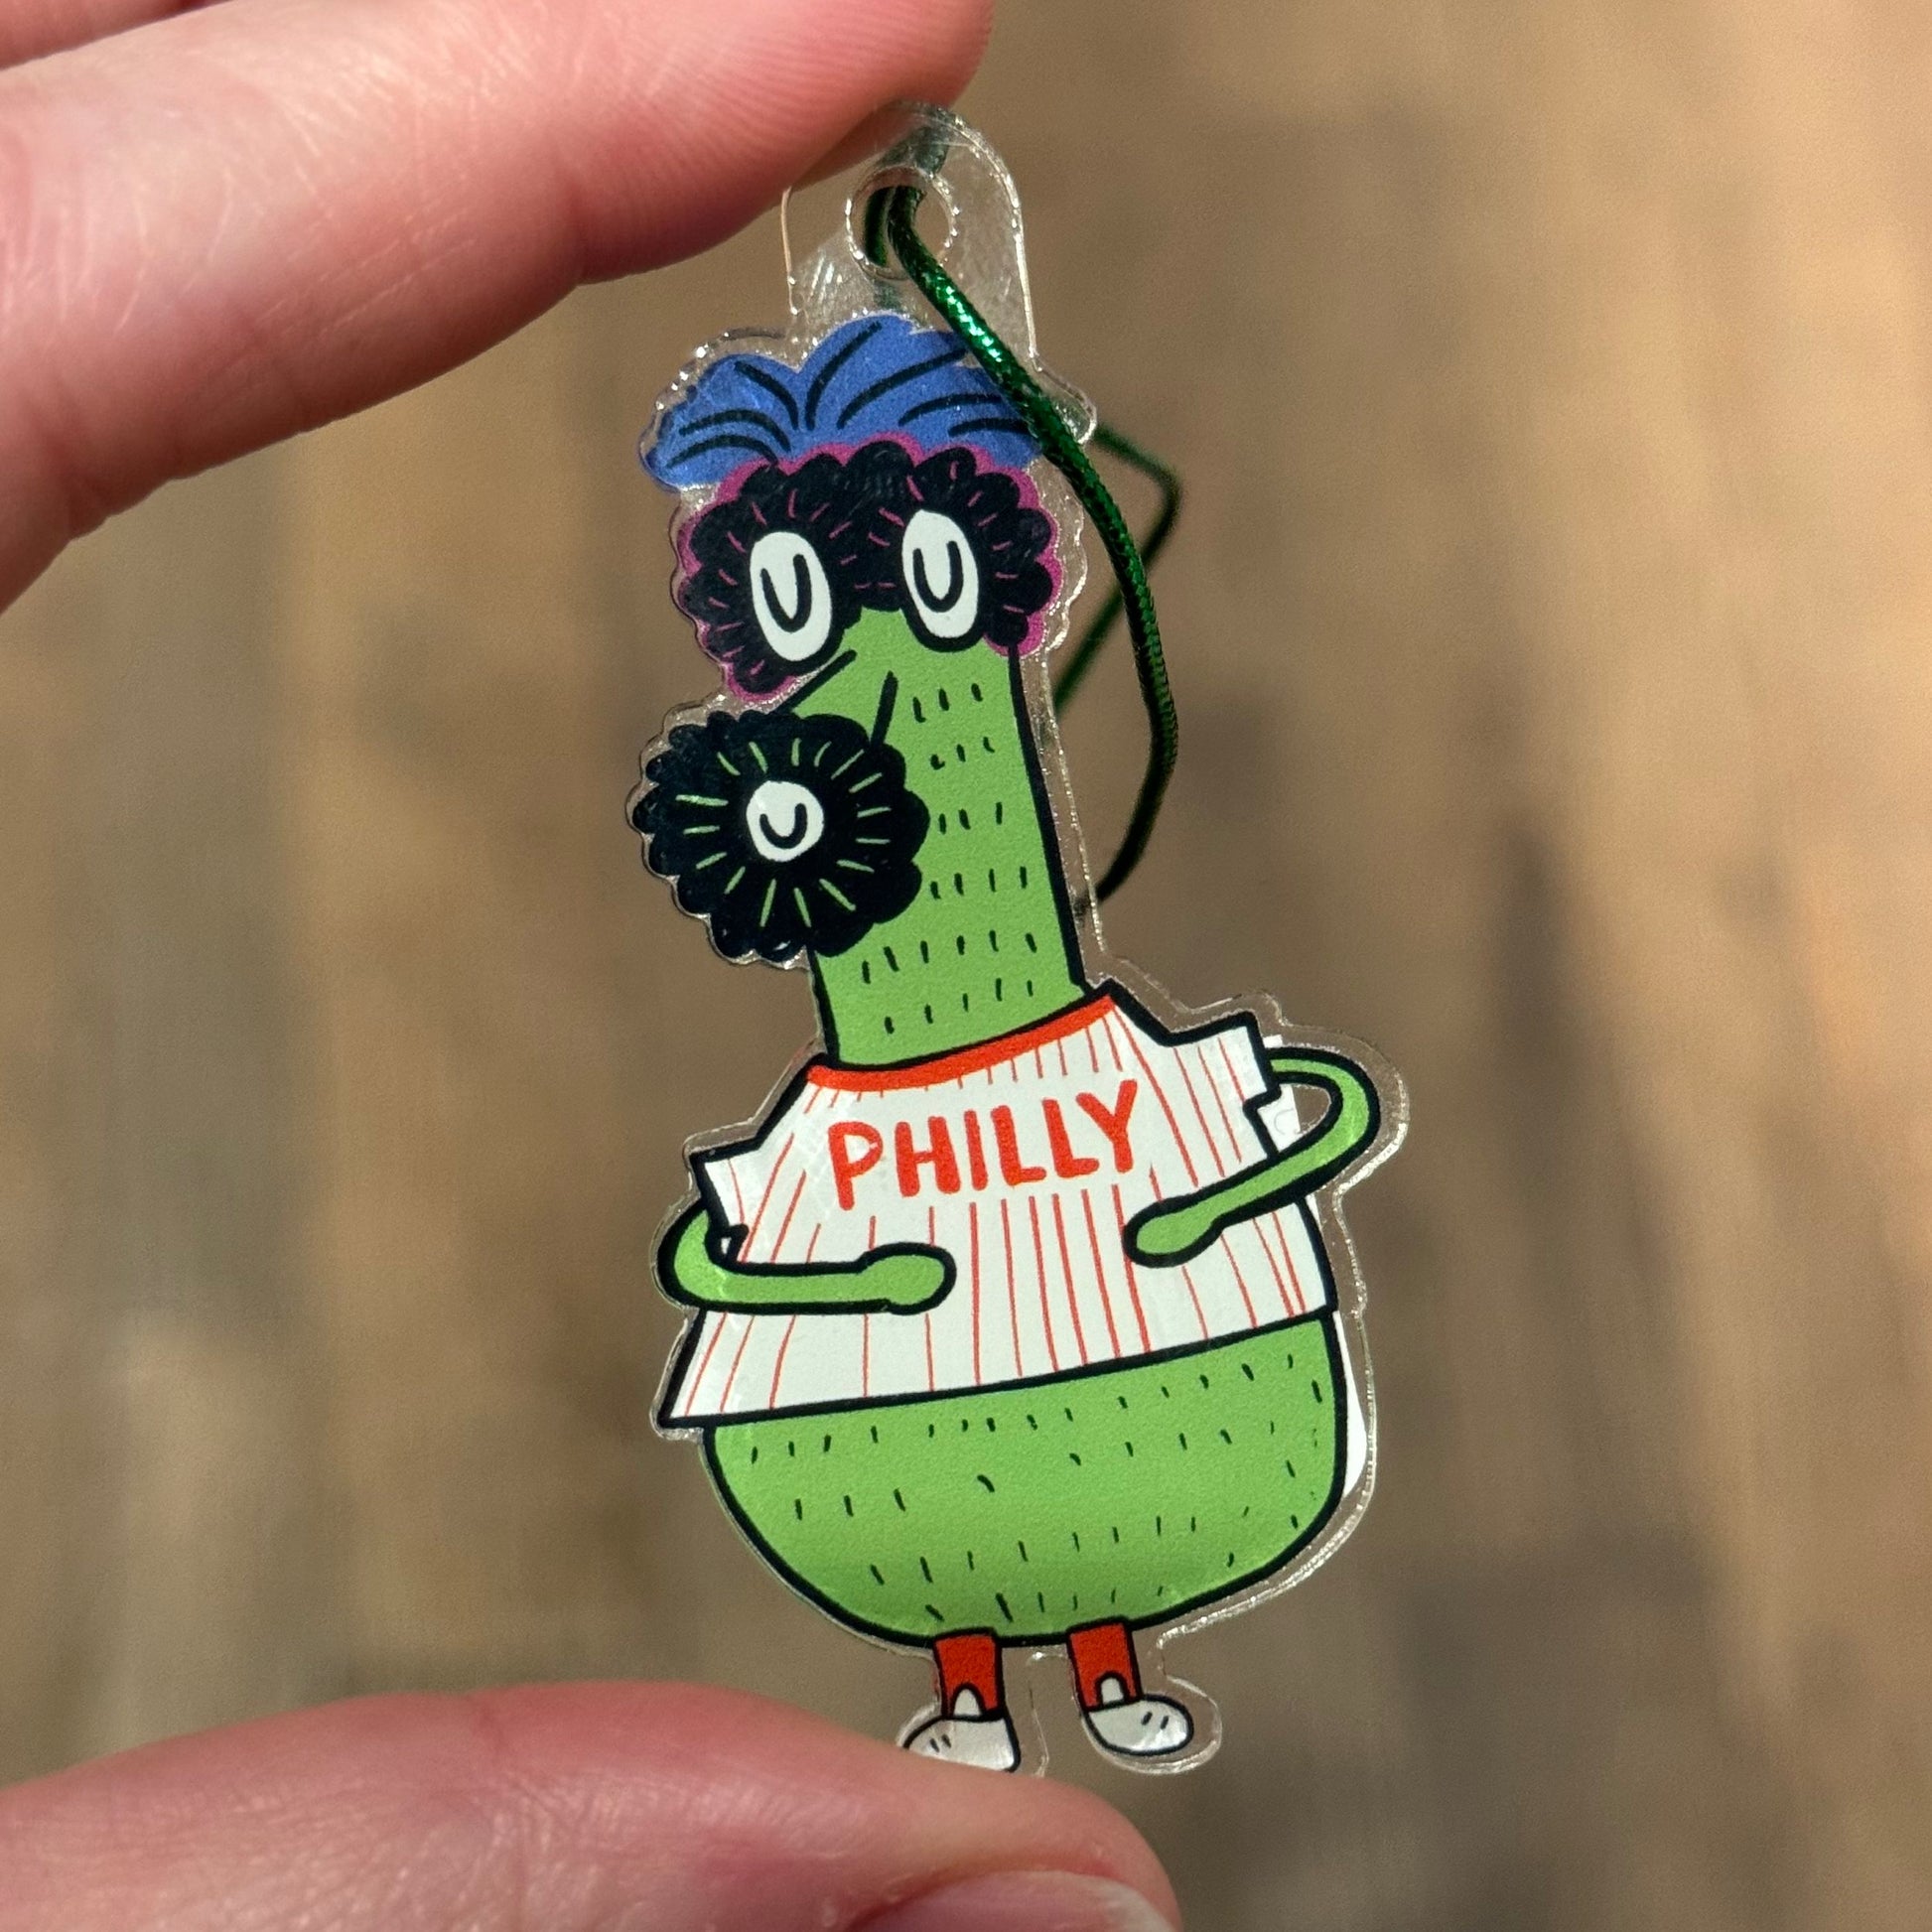 A hand holds a Philly Acrylic Ornament featuring a green cartoon character wearing a jersey labeled "PHILLY." The ornament, designed by Ana Thorne, has exaggerated facial features and a blue and purple pom-pom hat, embodying true Philly pride.